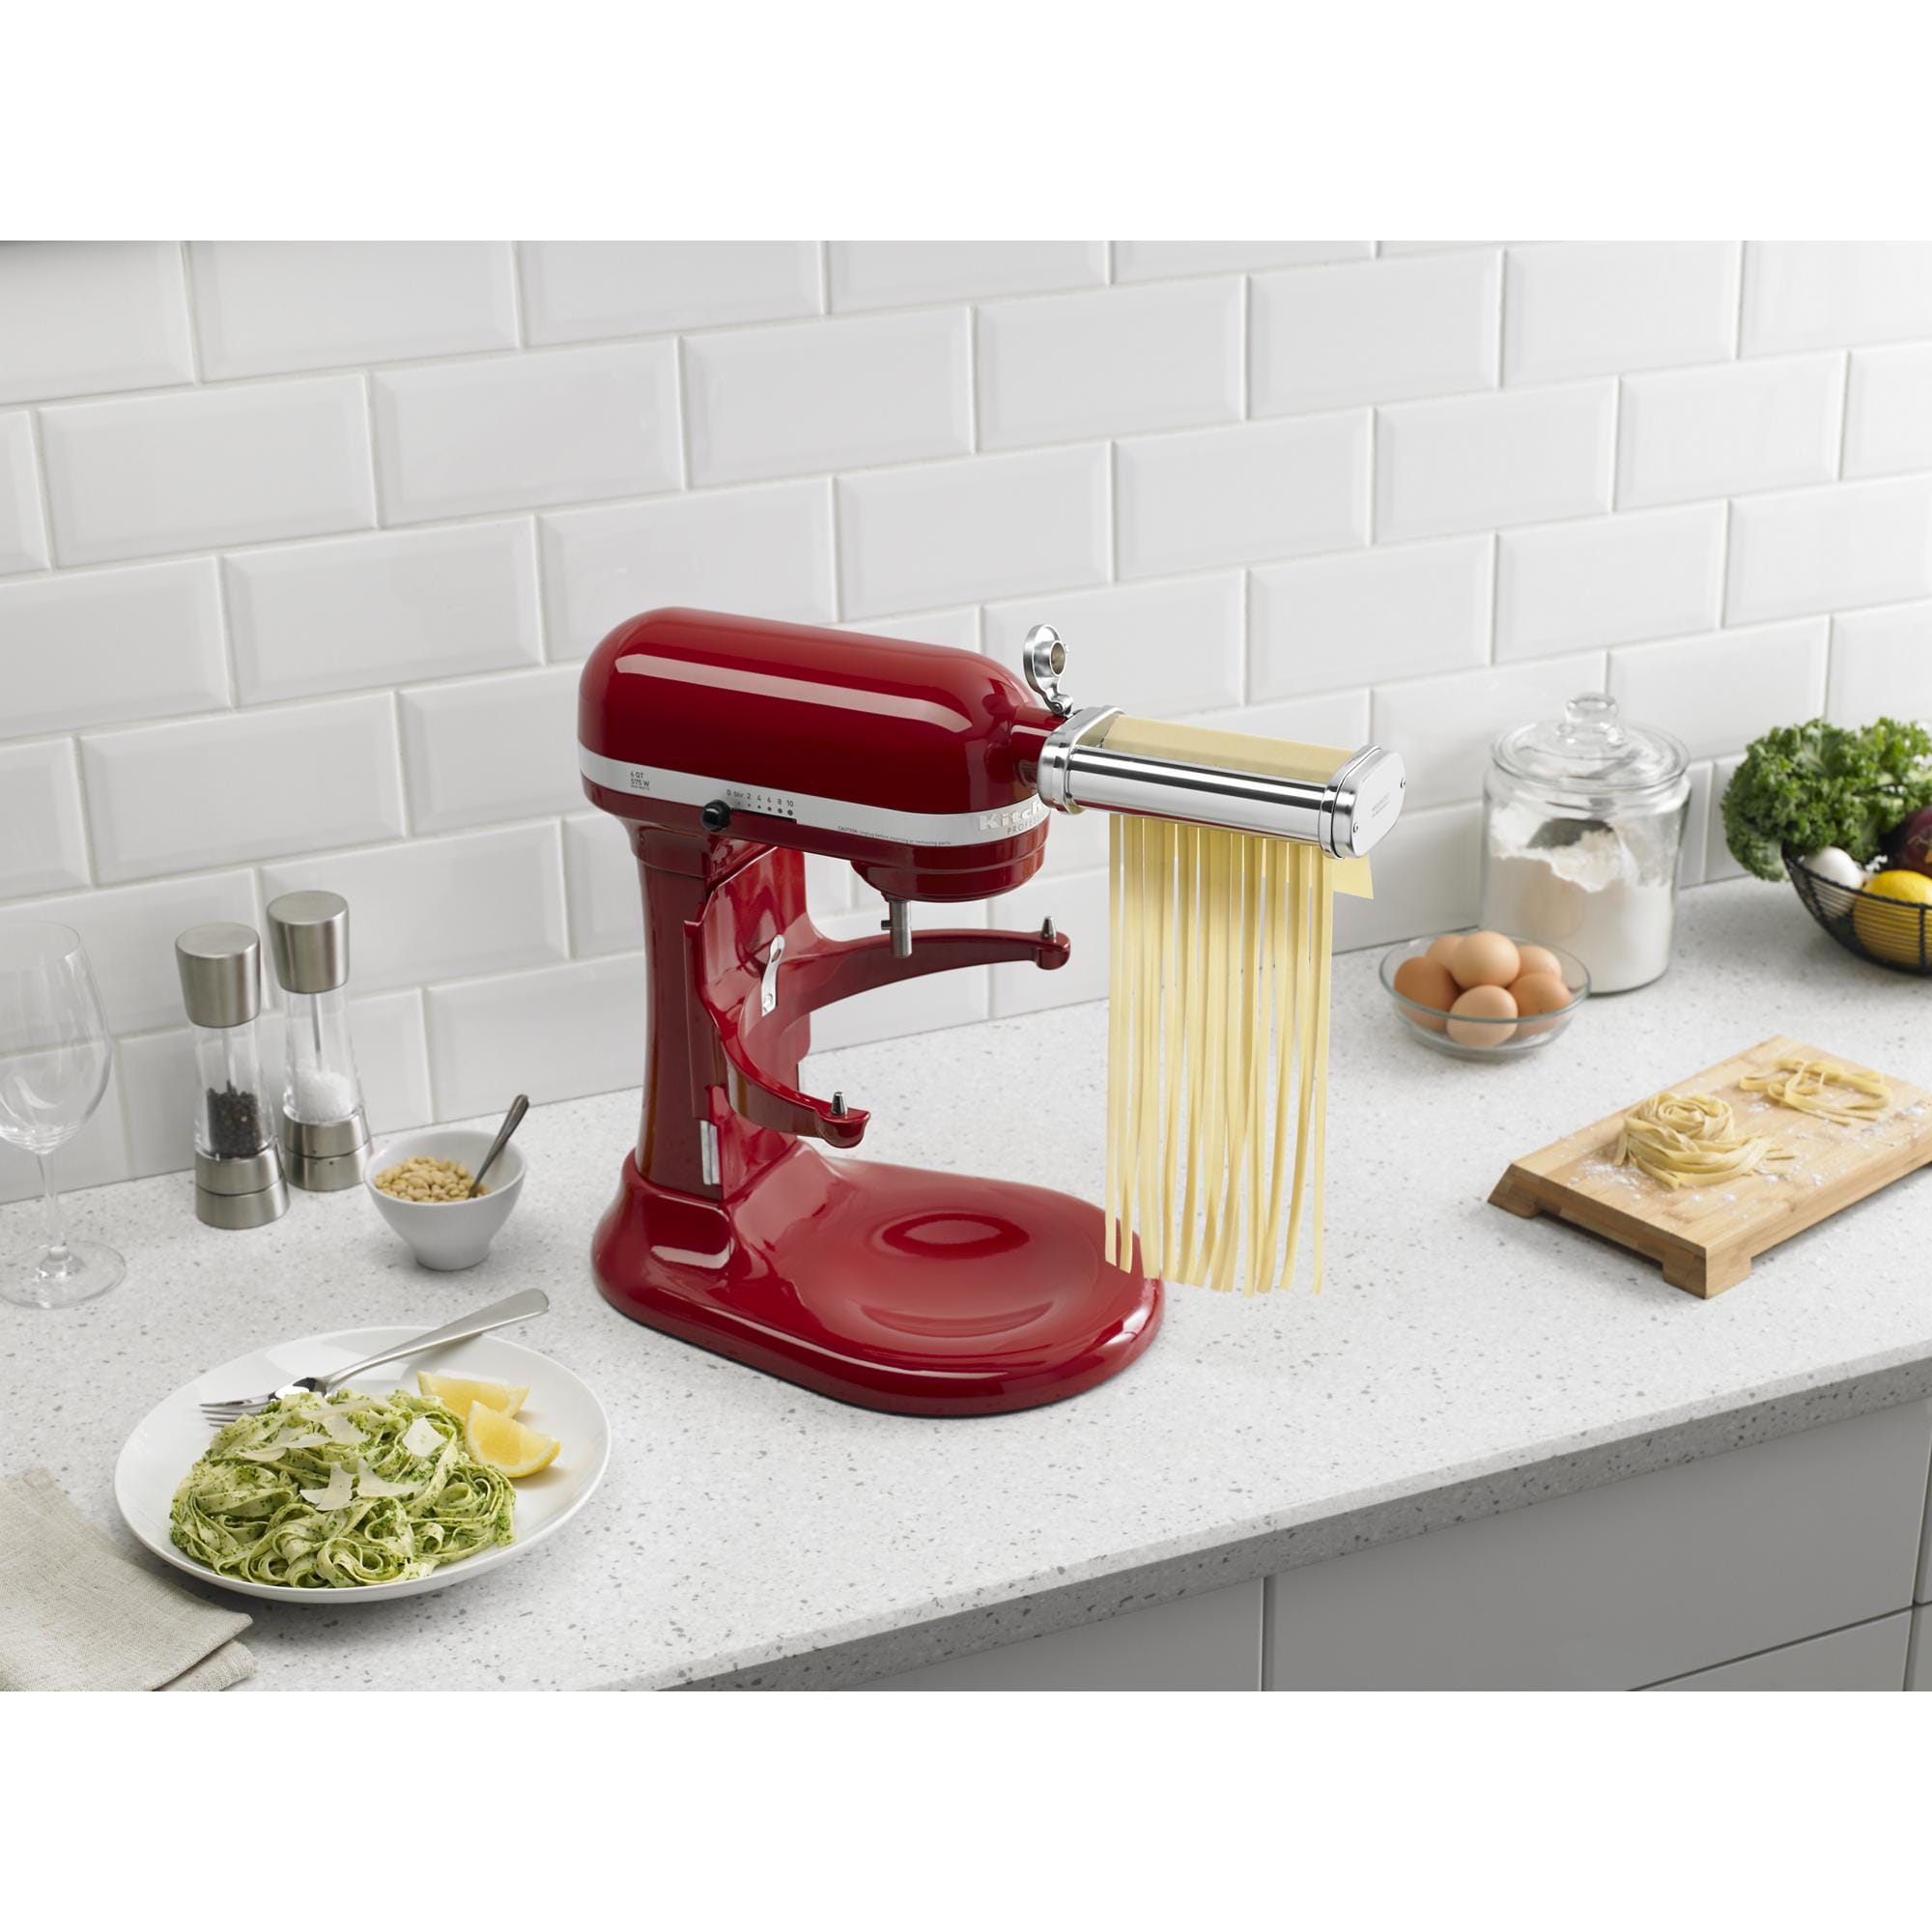 KitchenAid Residential Stainless Steel Pasta Roller and Cutter Set